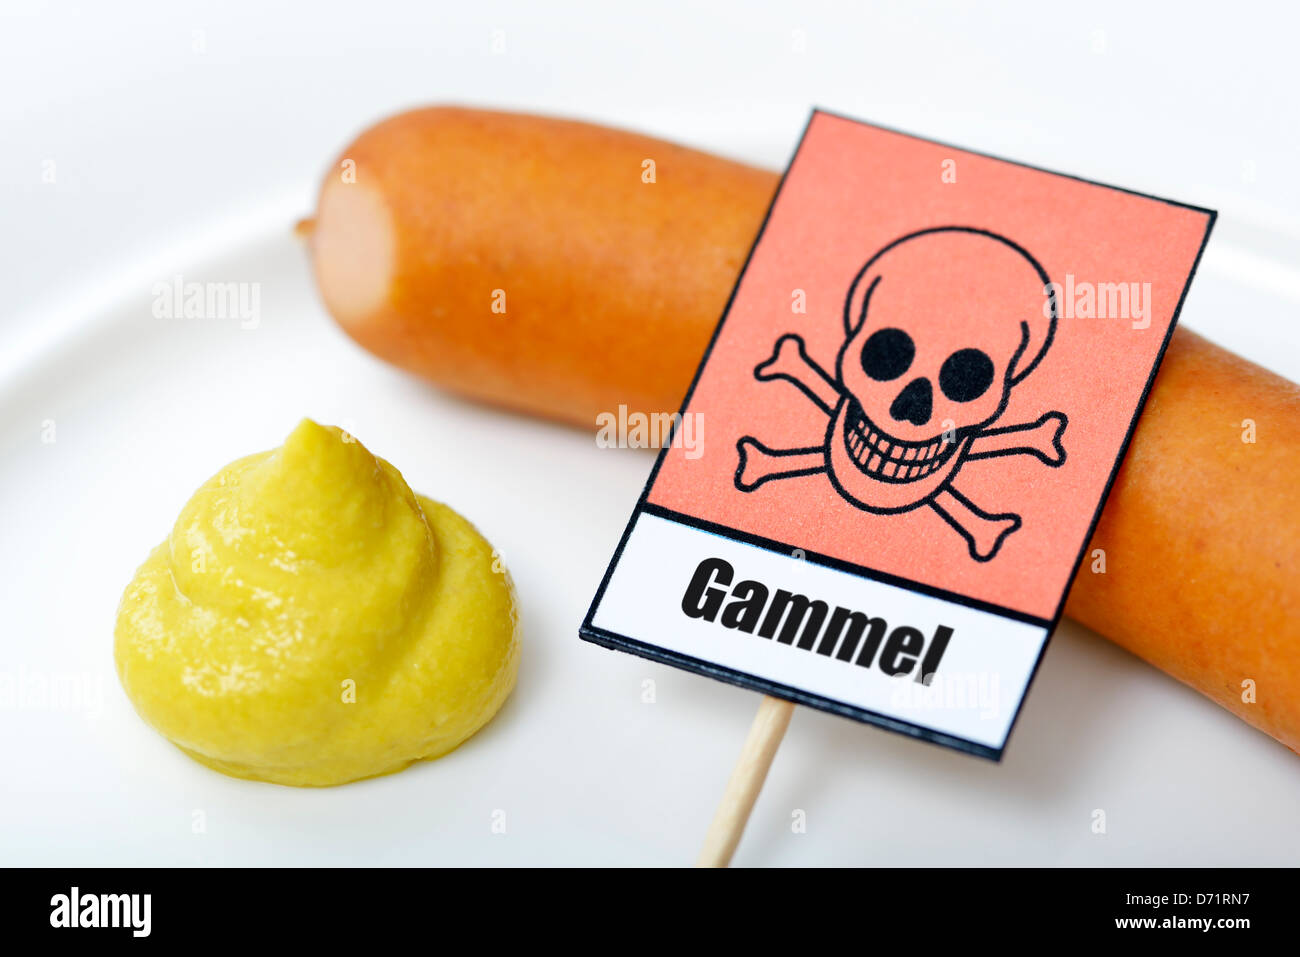 Small sausages with death's-head warning and Gammel stroke, Gammelfleisch Stock Photo